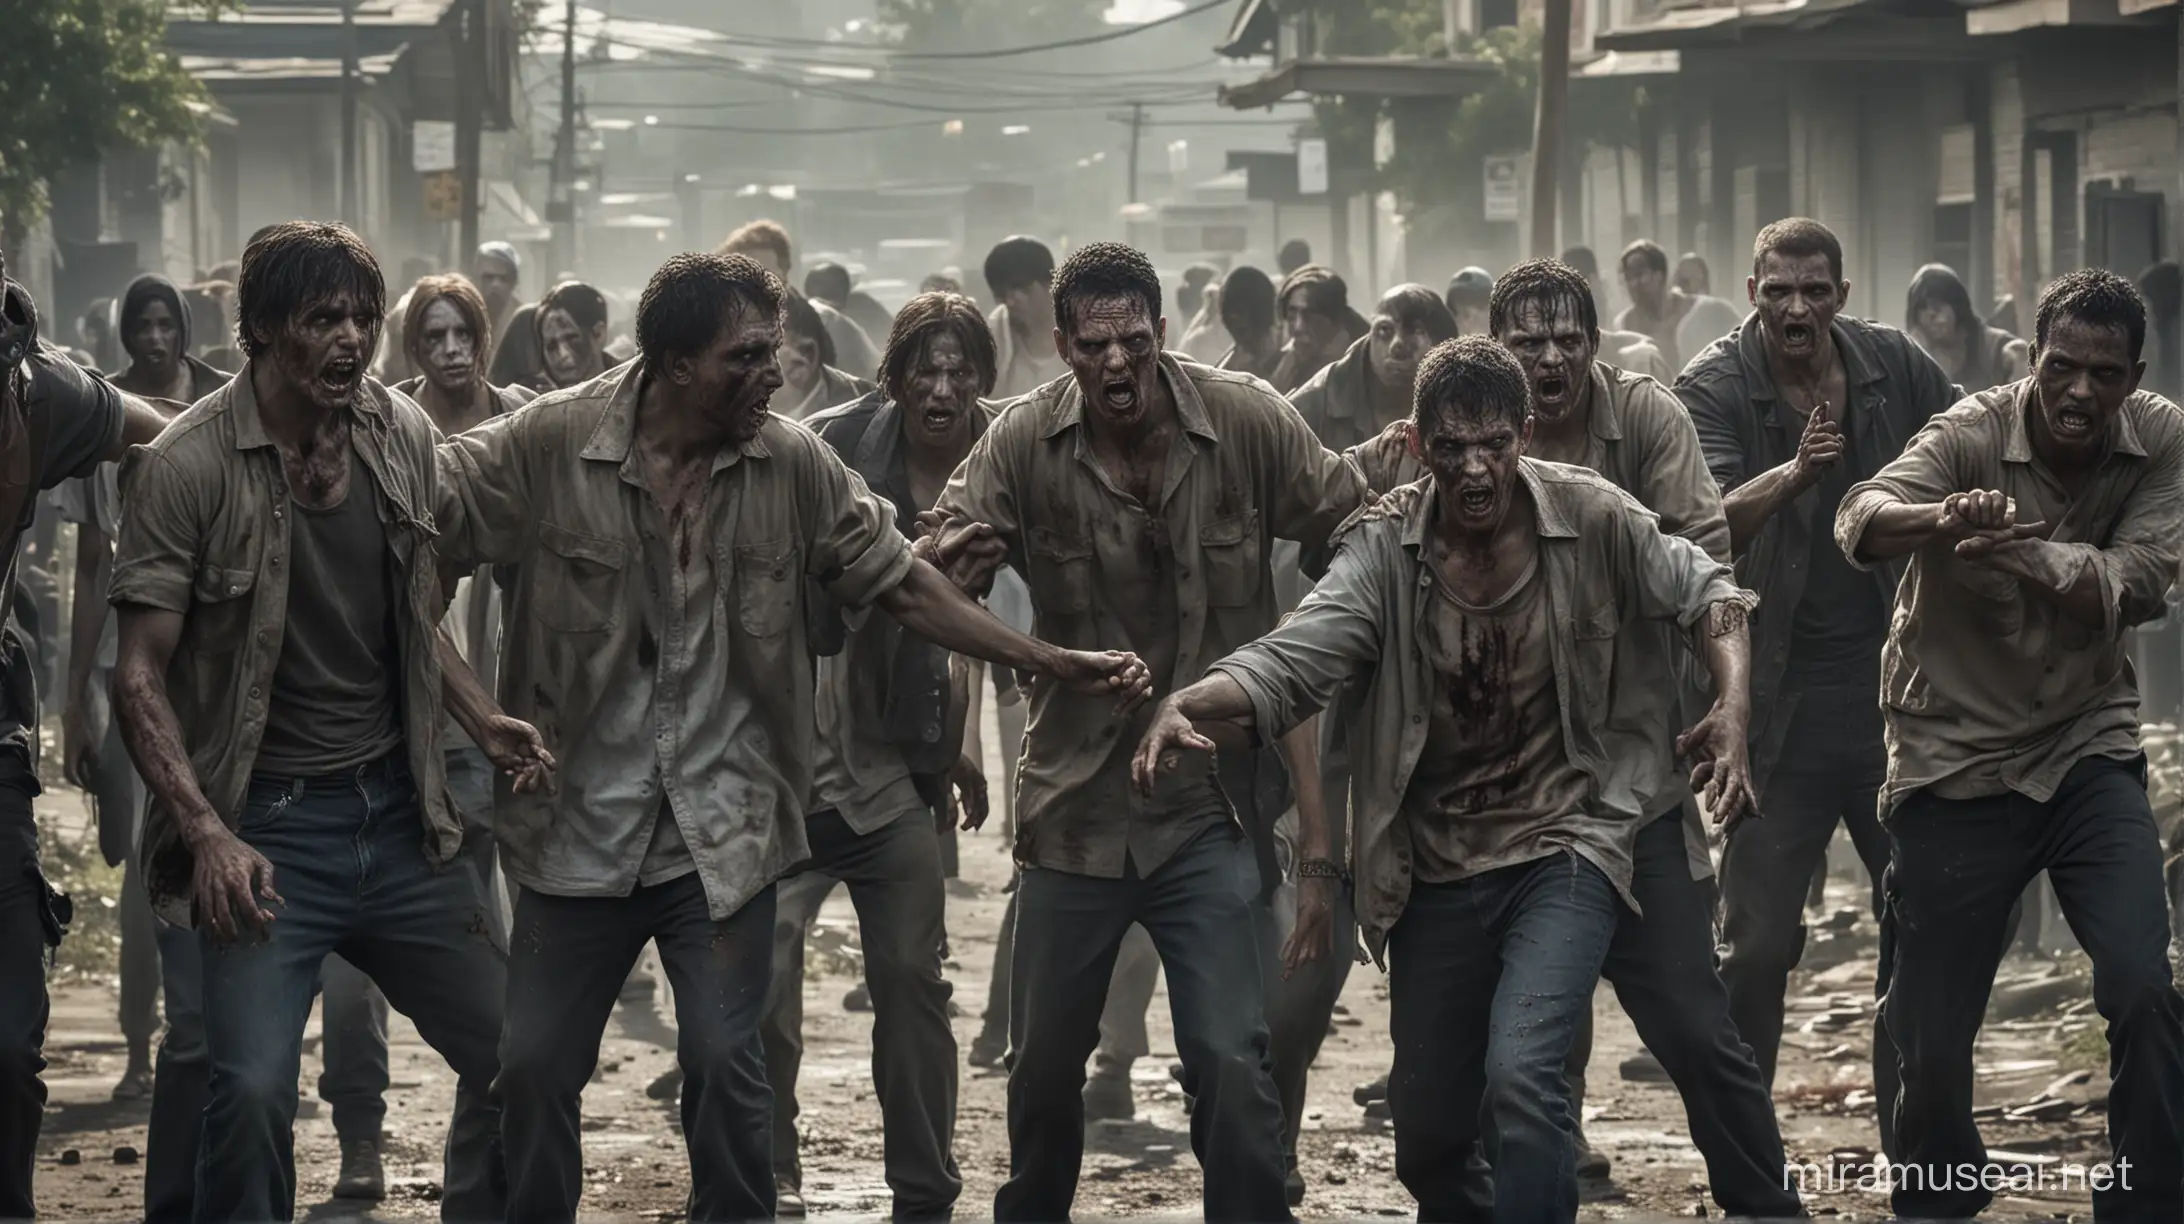 gangs fight and one side is held hostage during the zombie era